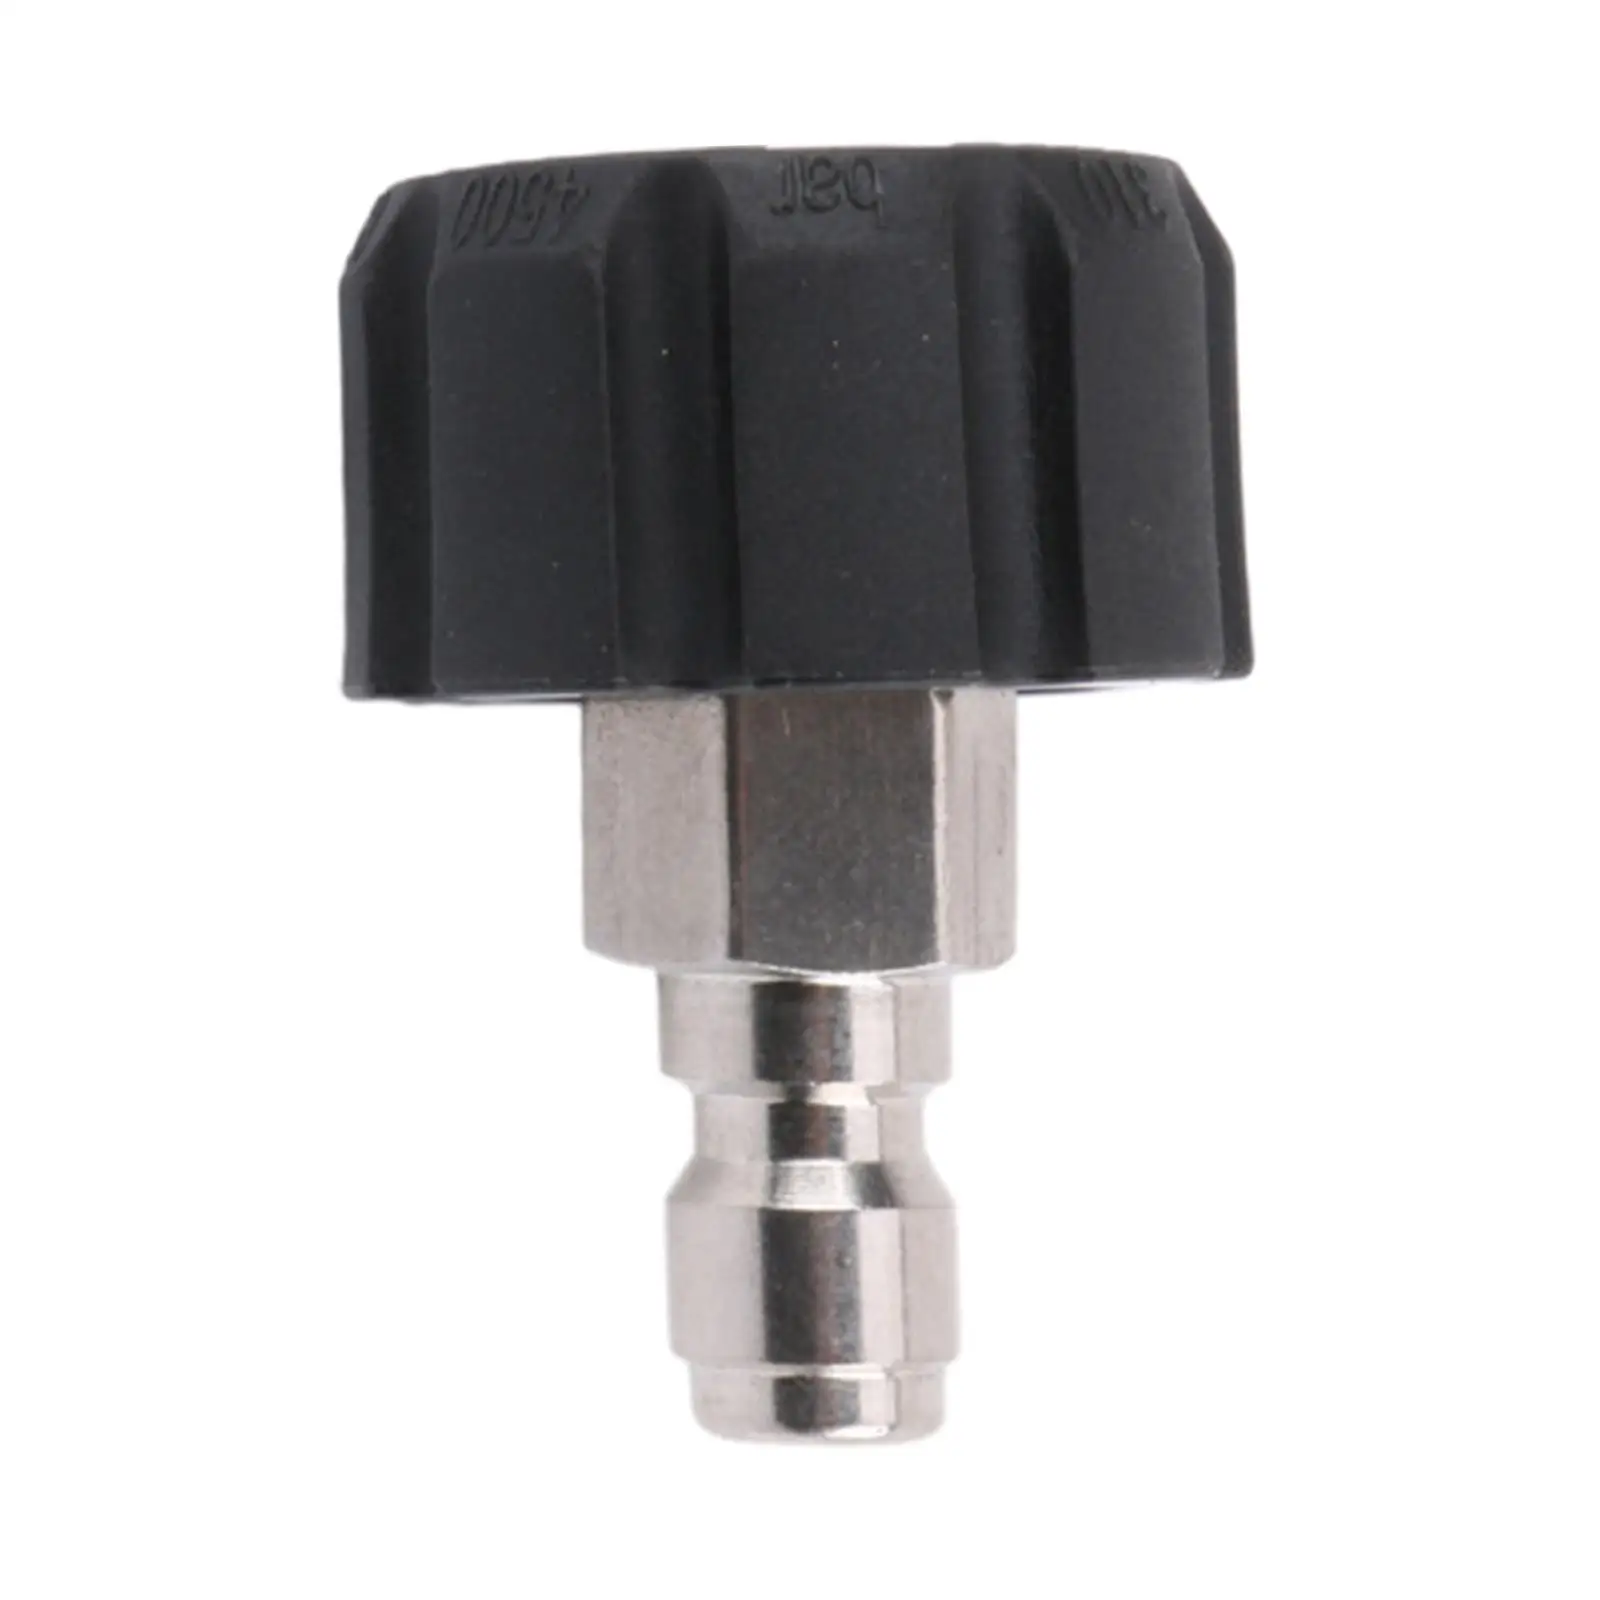 Pressure Washer Adapter Household Durable Rustproof Universal 1/4 inch Quick Connect Adapter for Pressure Washer Accessories